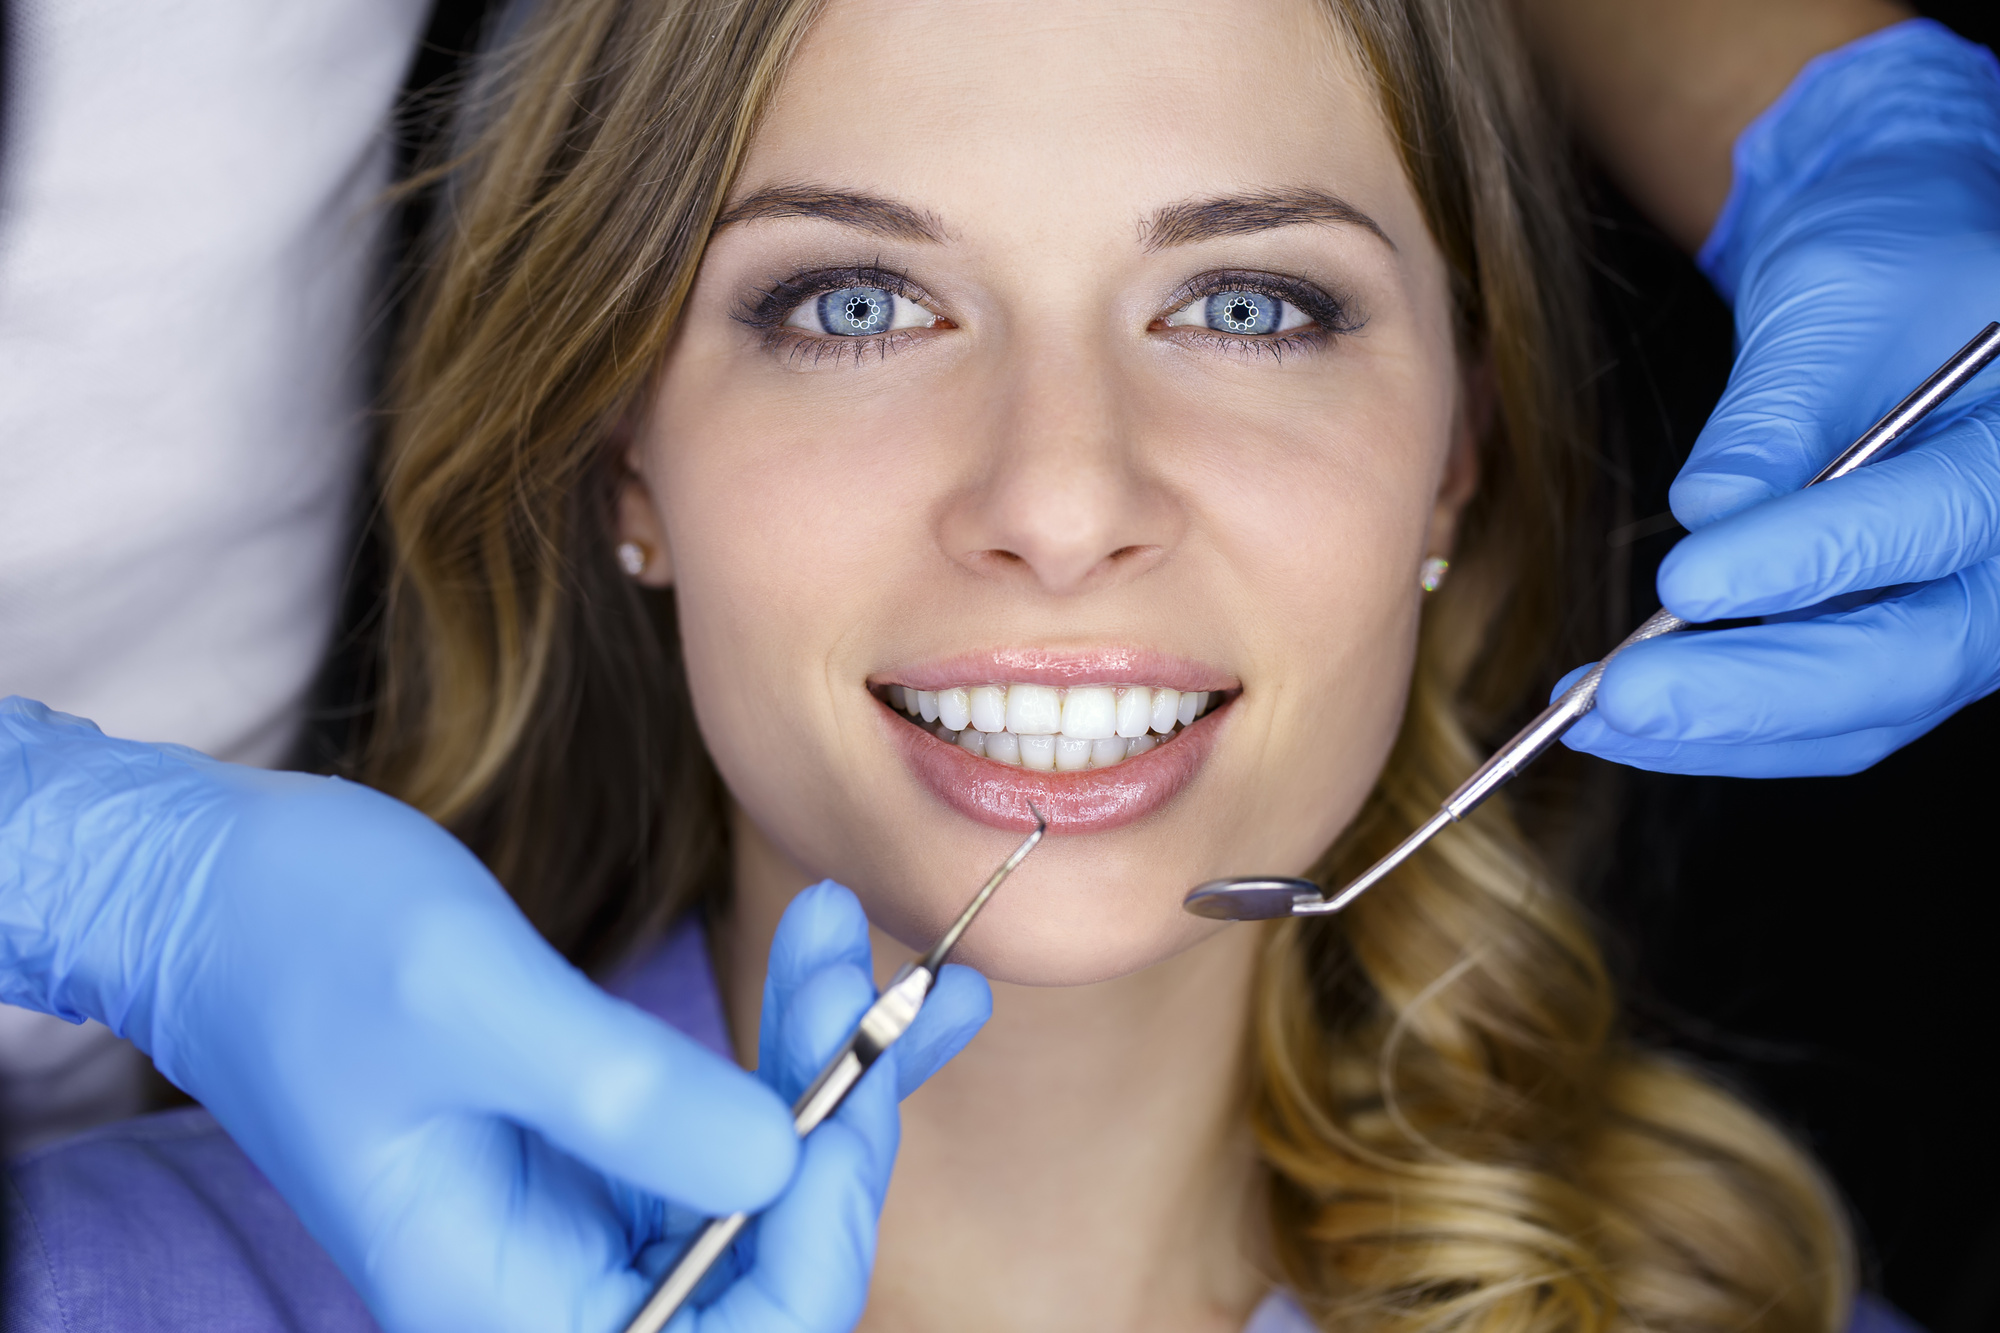 How Can Cosmetic Dentistry Improve Your Smile?